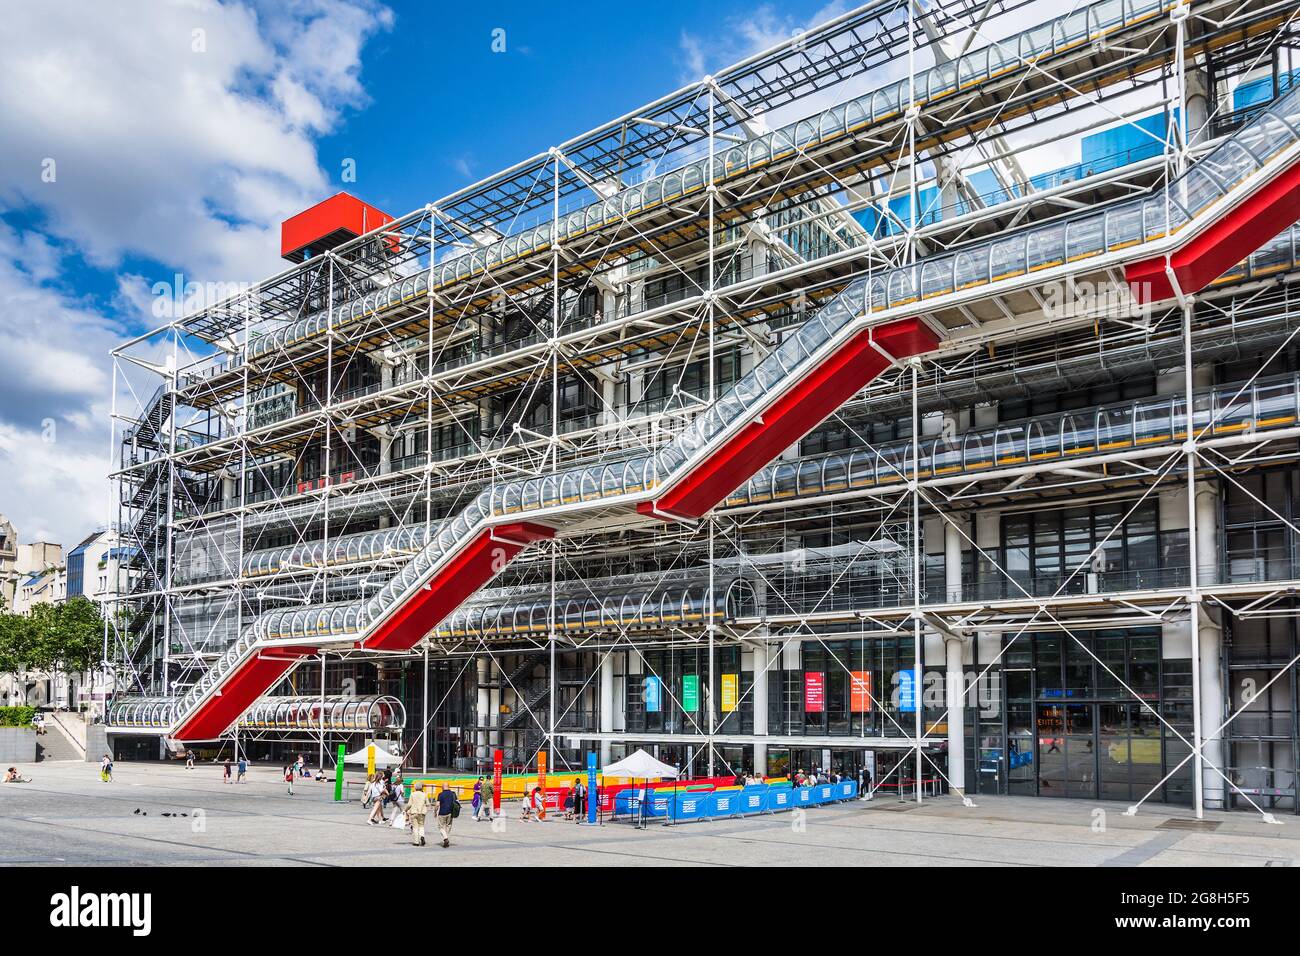 Walkway on the exterior of the Centre Pompidou modern art gallery, designed by Richard Rodgers - Beaubourg, Paris, France. Stock Photo